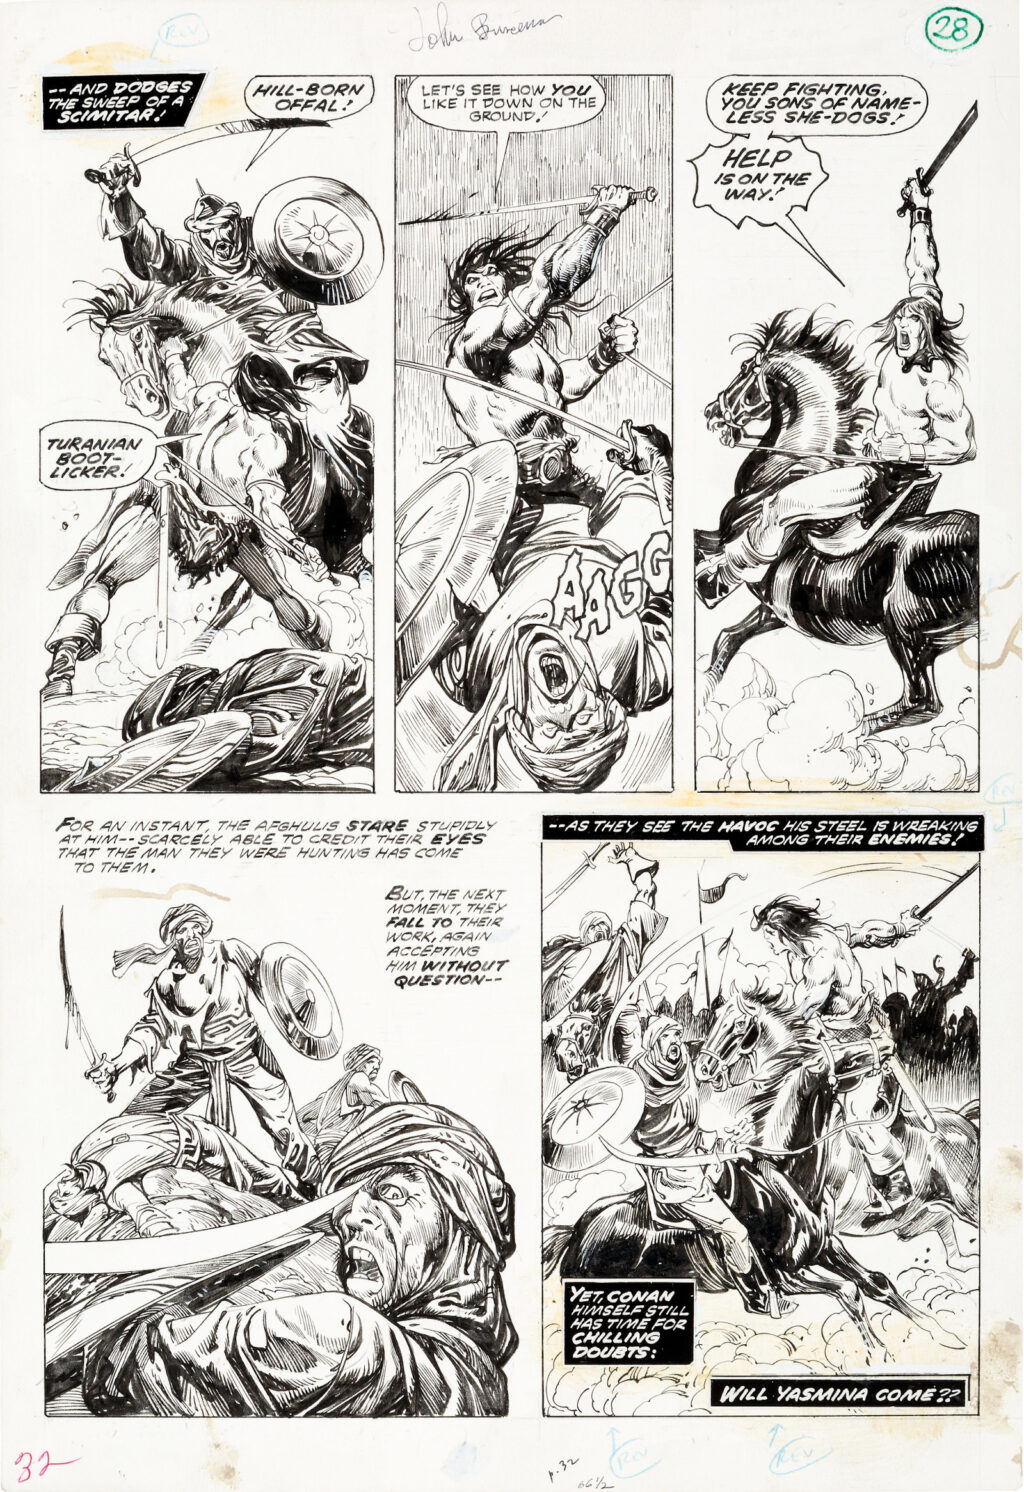 The Savage Sword of Conan issue 19 age 28 by John Buscema and Alfredo Alcala